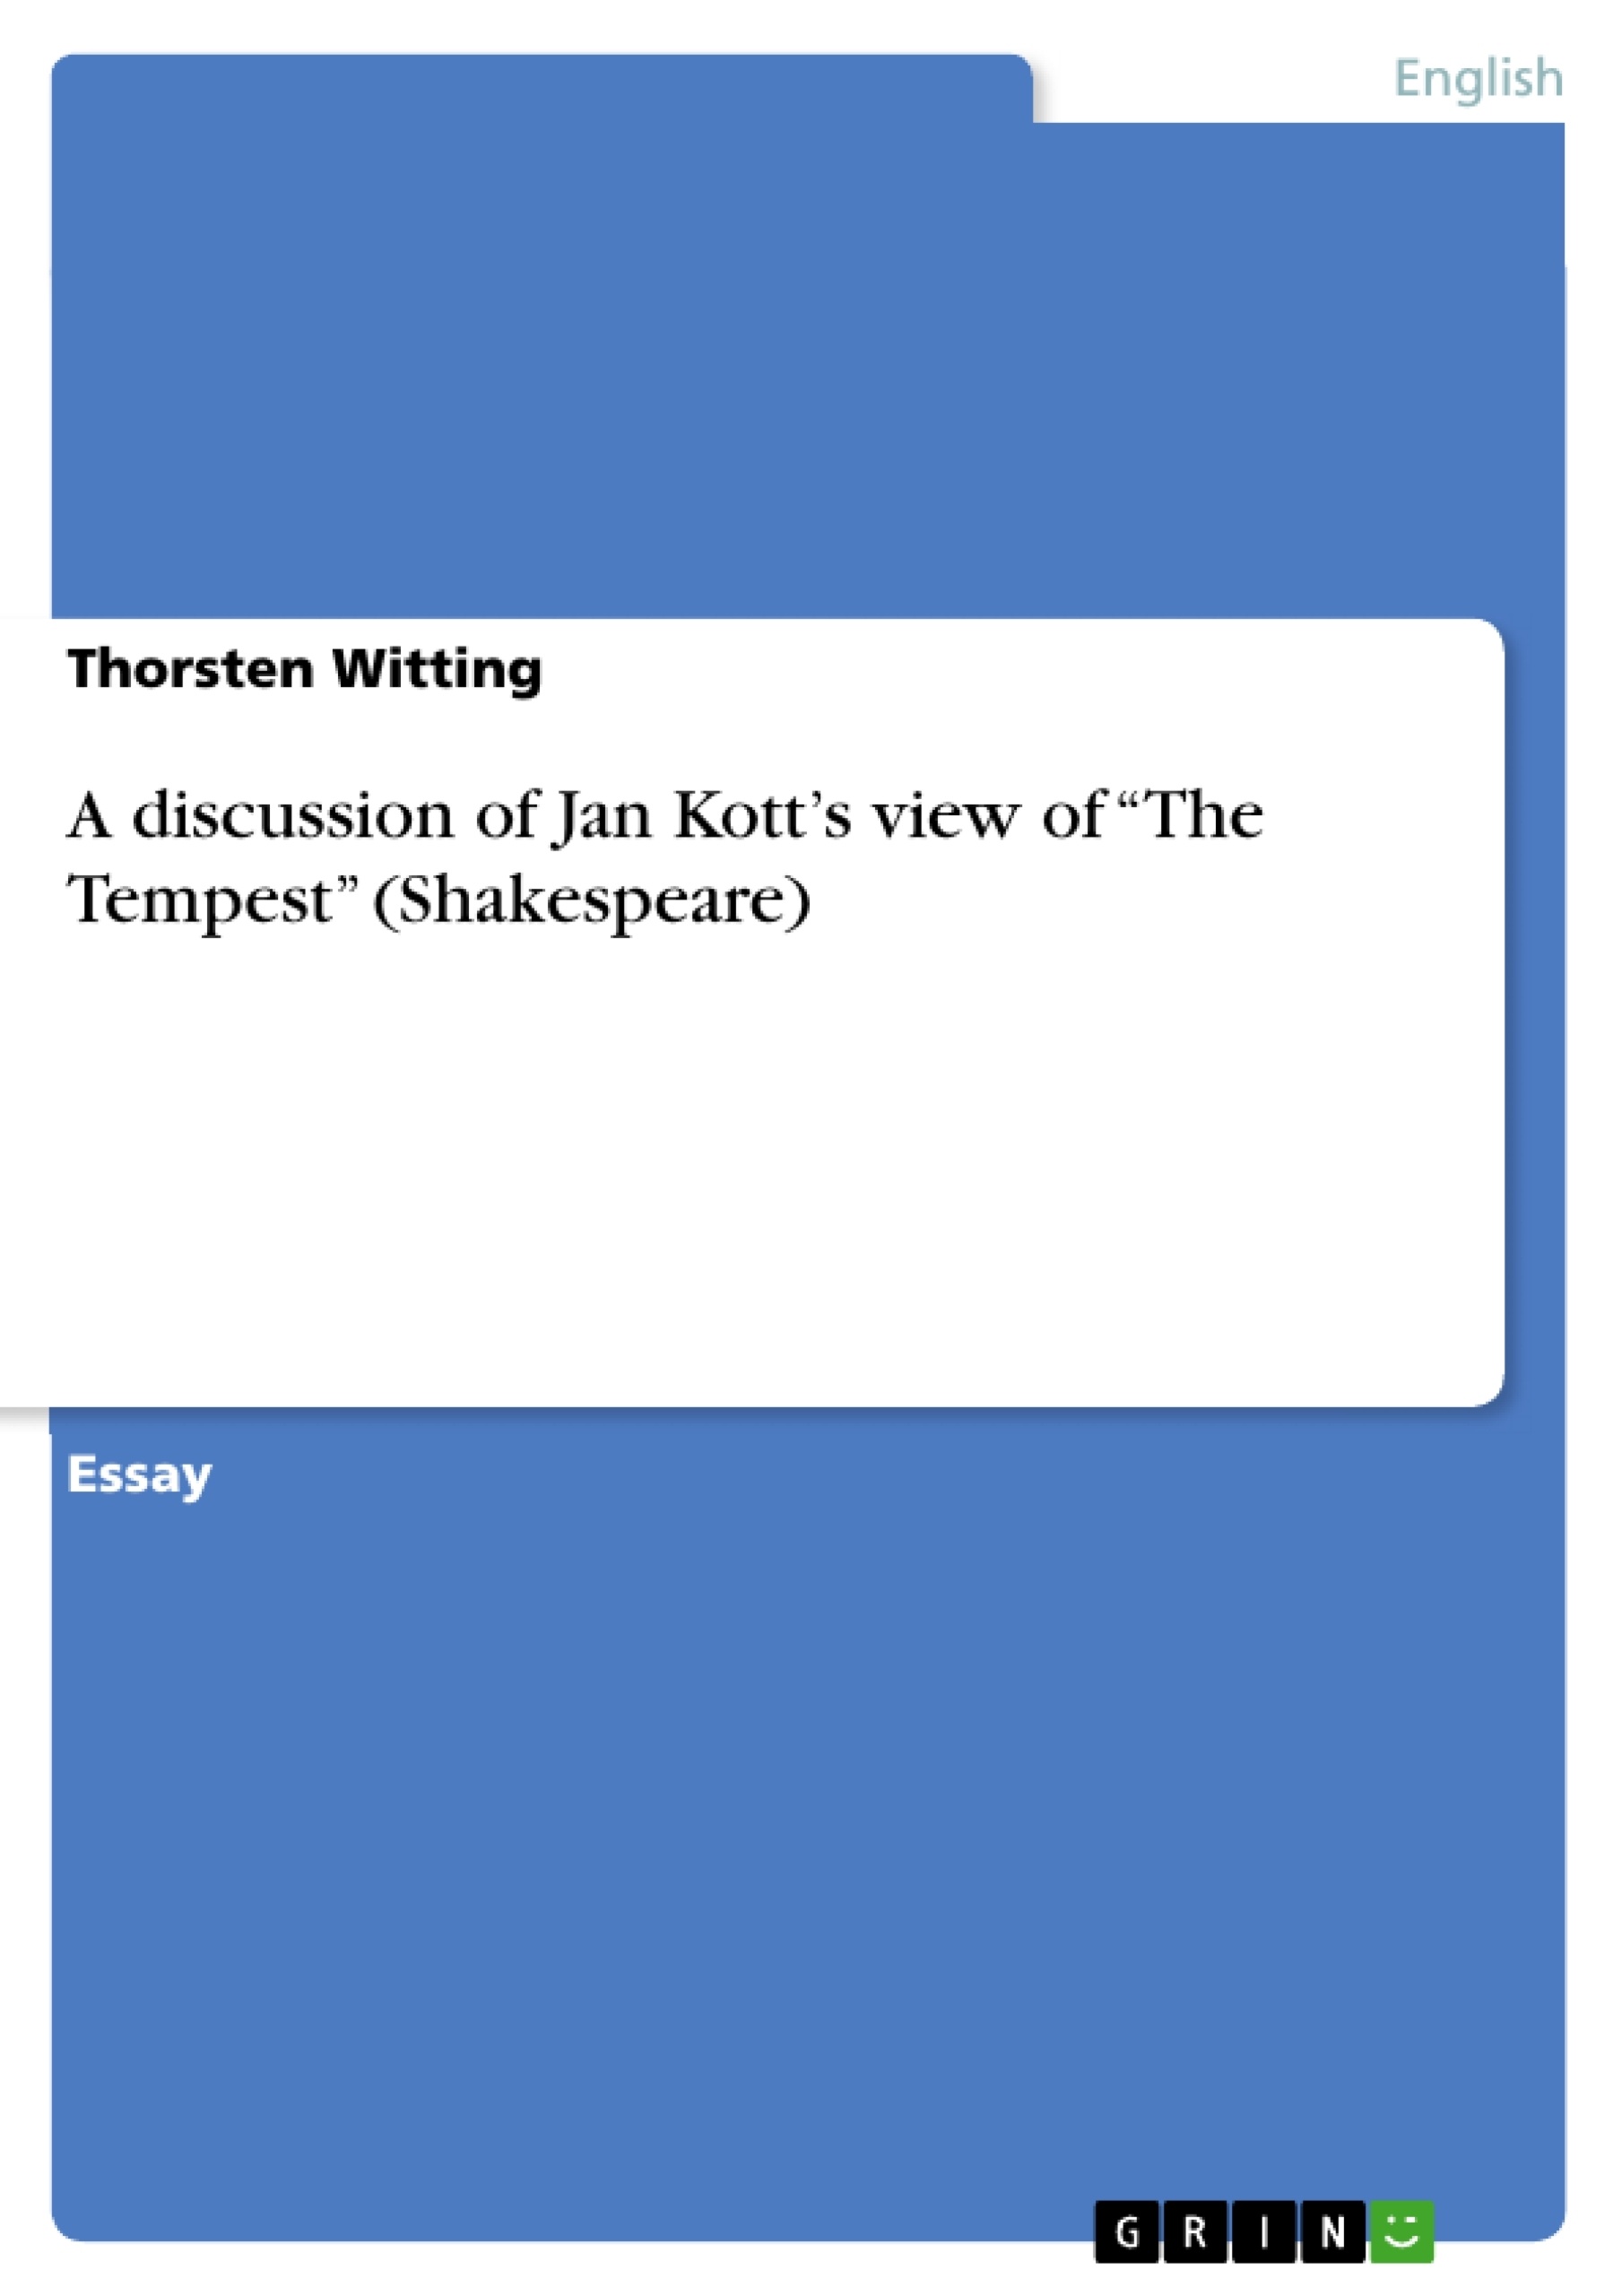 Titre: A discussion of Jan Kott’s view of “The Tempest” (Shakespeare)